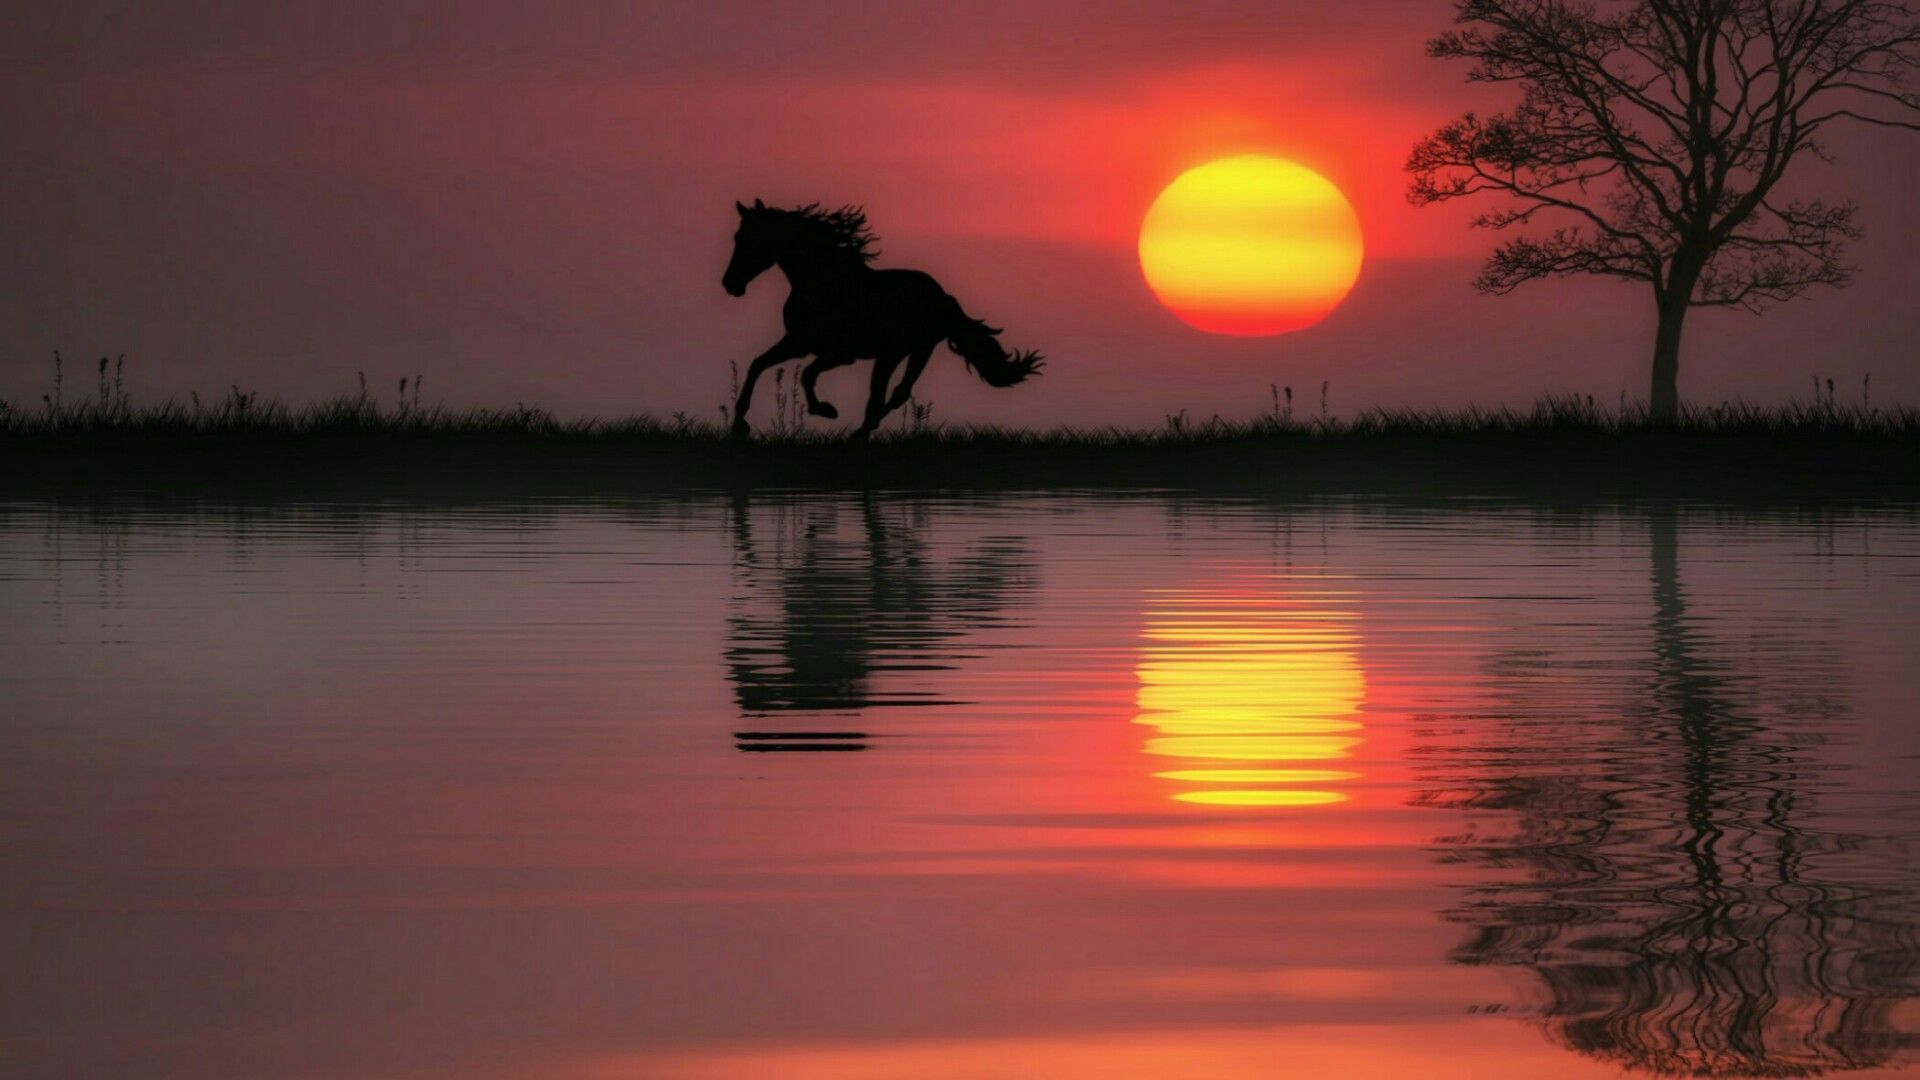 Horses In Sunset Wallpapers - Wallpaper Cave